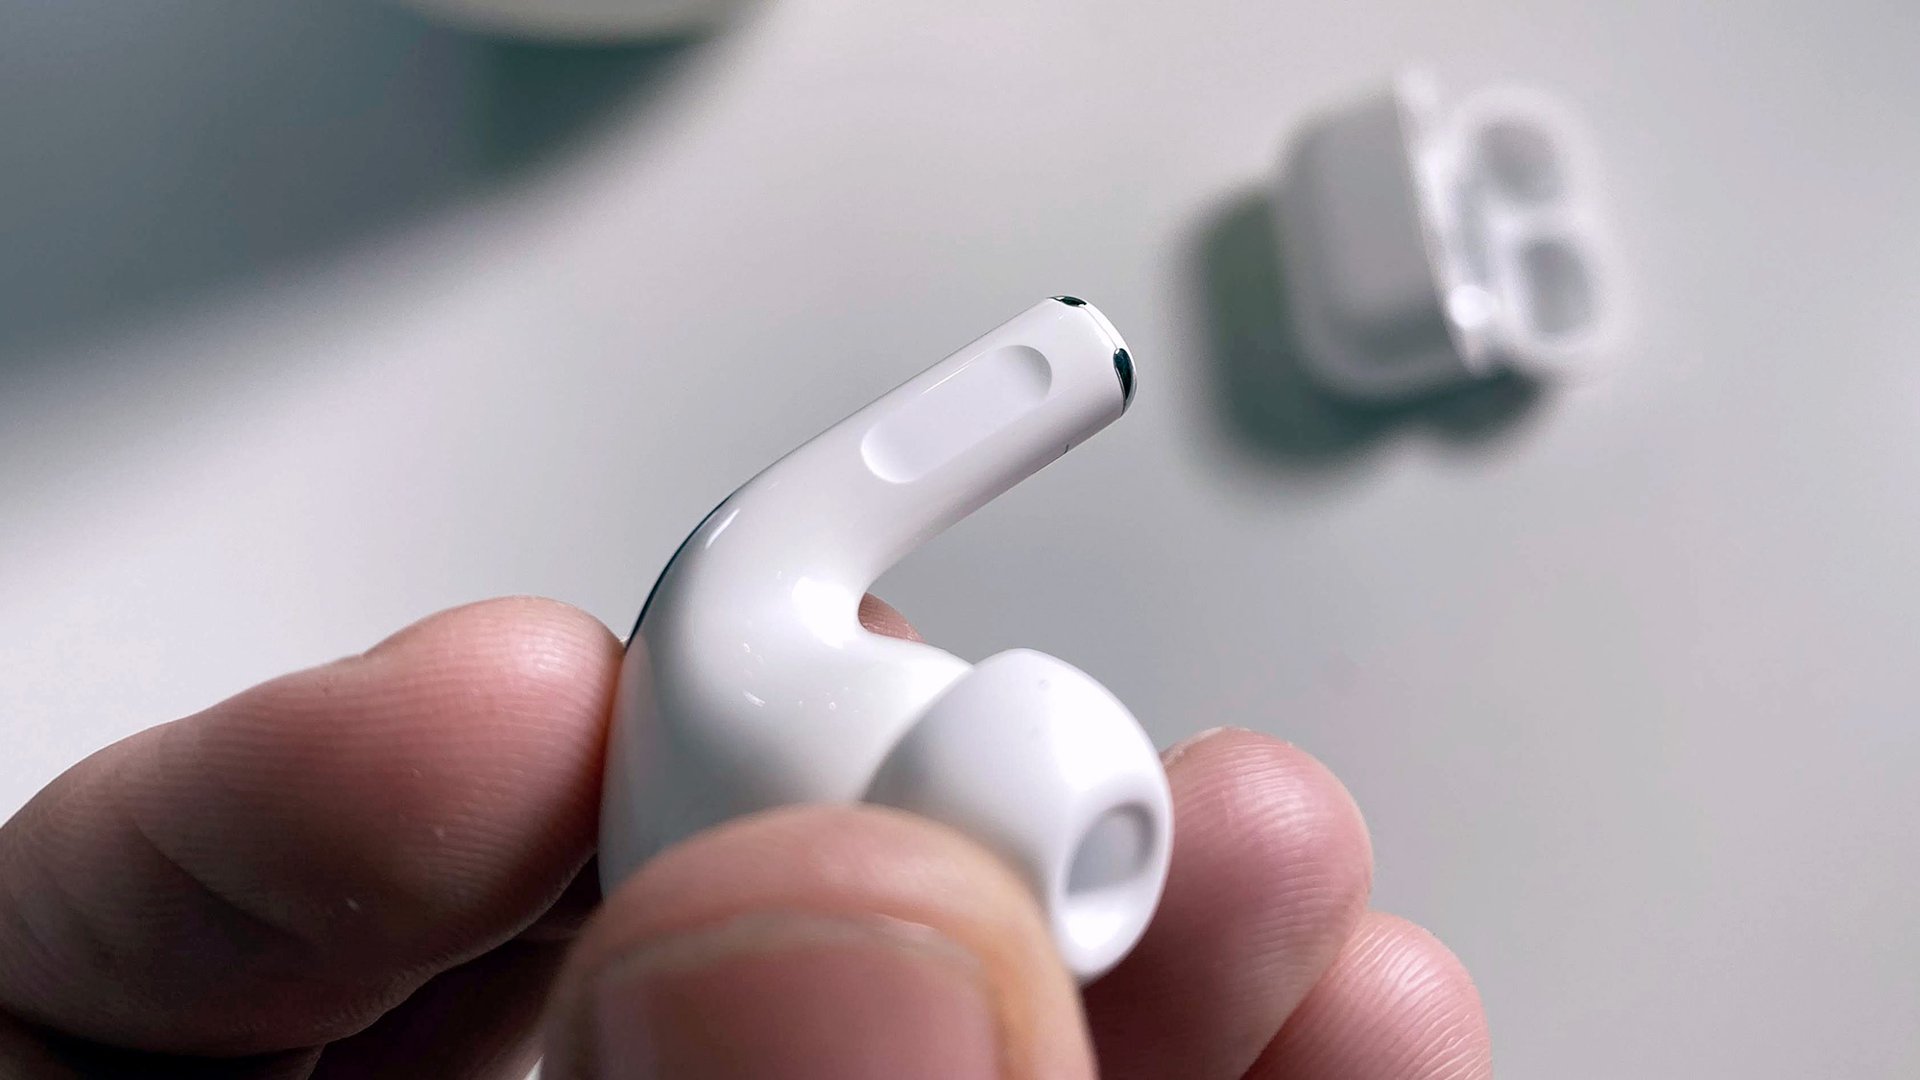 a close up of an AirPods Pro earphone